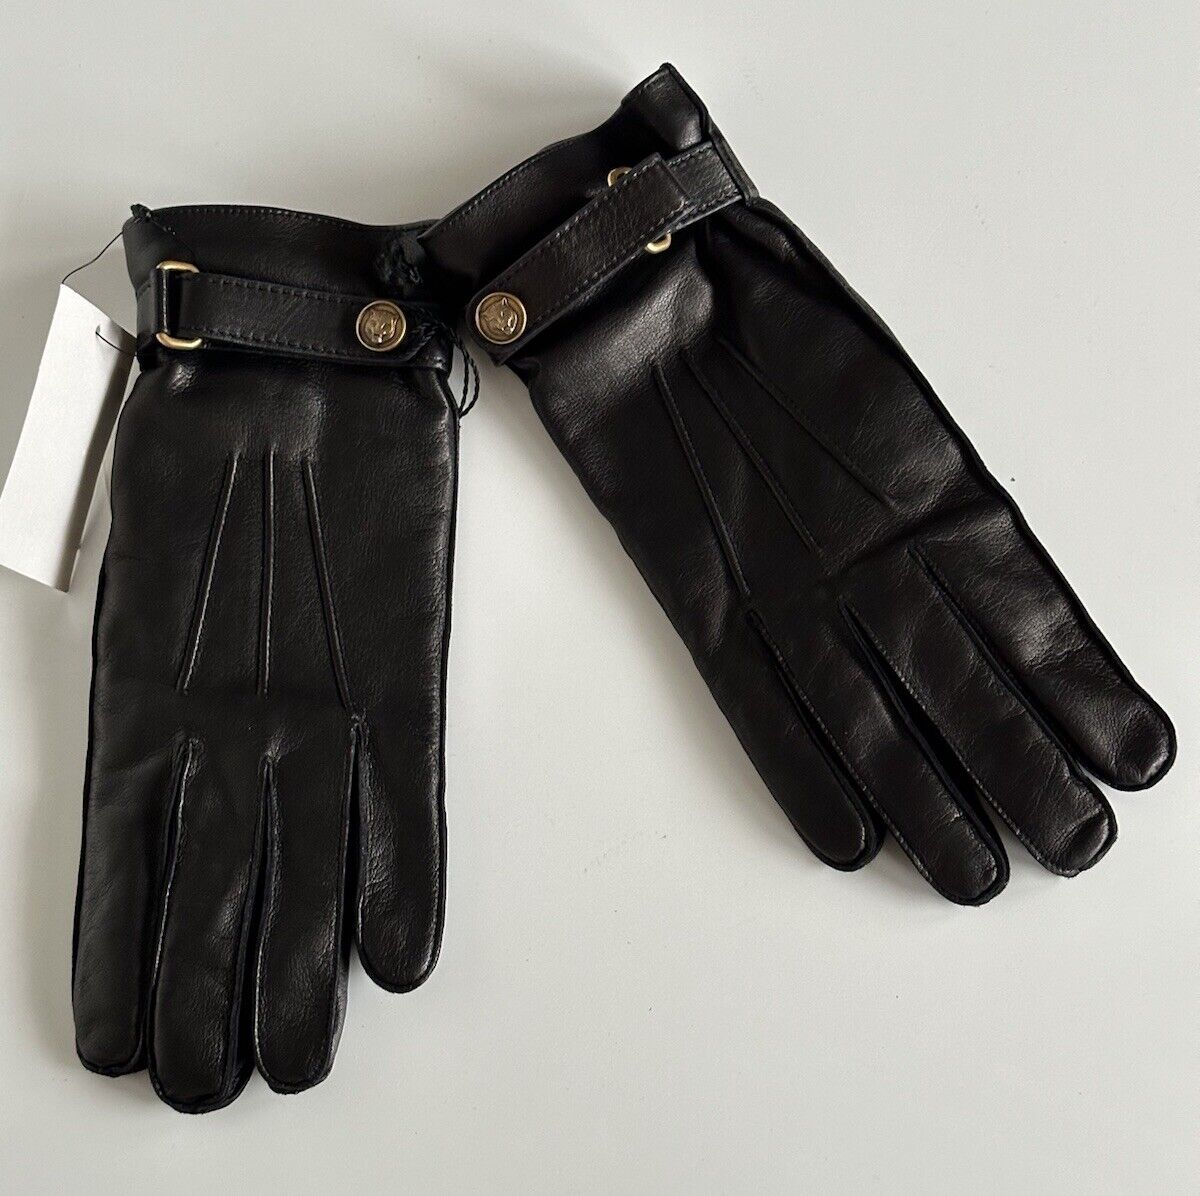 NWT $630 Gucci  Anger Cat Women's Leather Gloves Black Size 9 Italy 475379